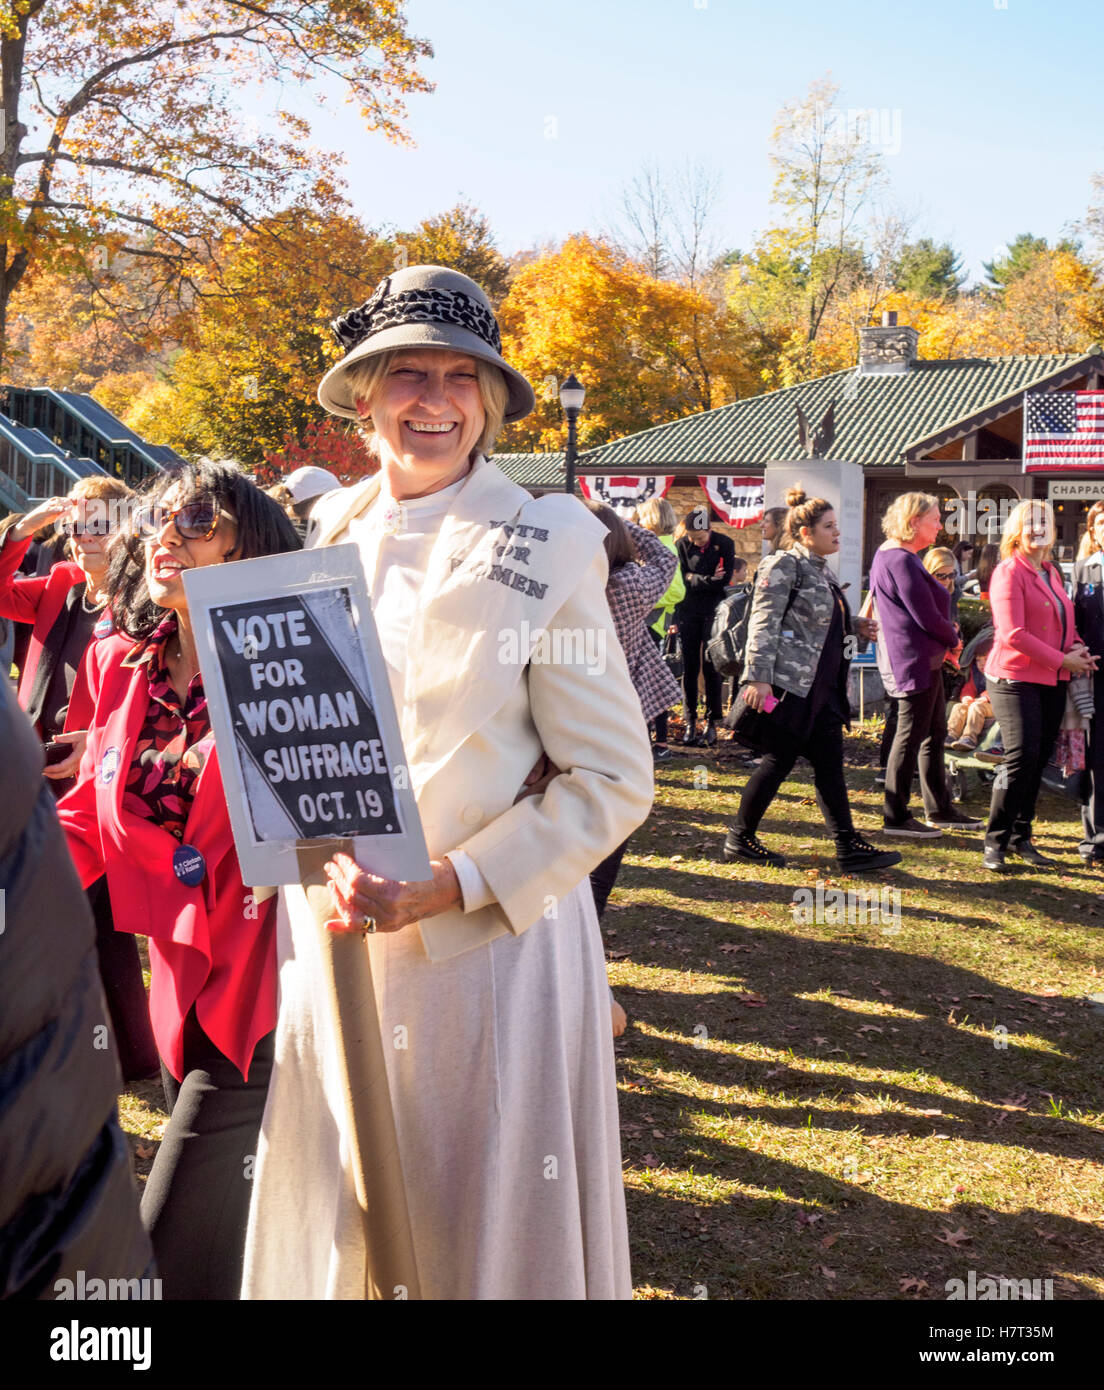 Chappaqua, NY, USA - 8 November 2016. Mary Refling of Chappaqua New York dressed as a suffragette in support of Hillary Clinton as gather in presidential candidate Secretary of State Clinton's home town of Chappaqua, New York for a Pantsuit Up flash mob at the Chappaqua Train Station on Election Day. Credit:  Marianne A. Campolongo/Alamy Live News Stock Photo